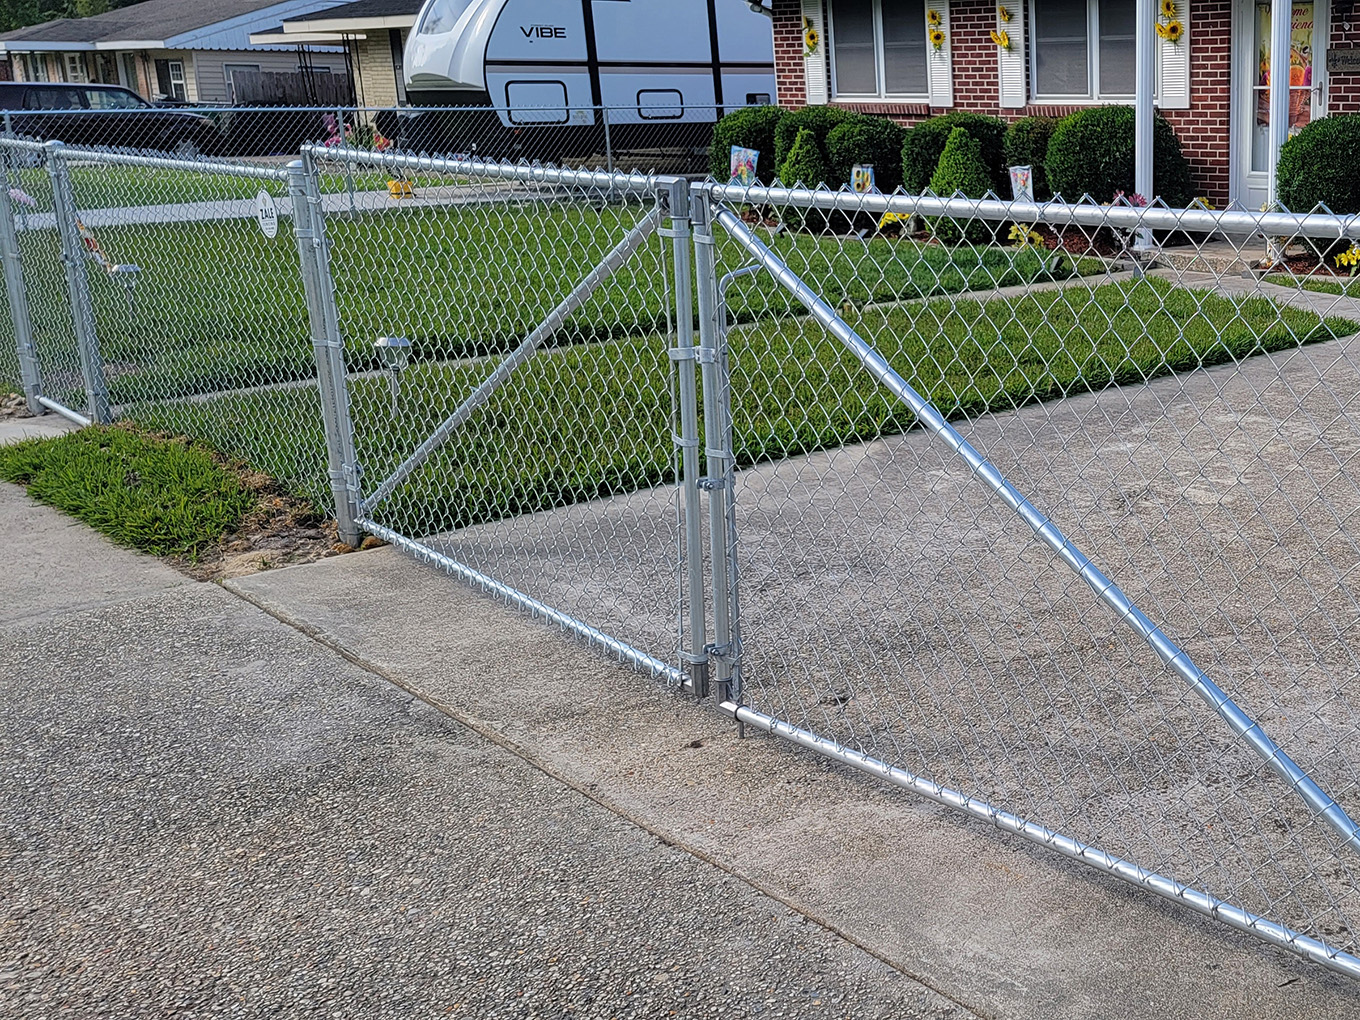  Galvanized residential chain link fencing in Slidell Lousiana, Louisiana